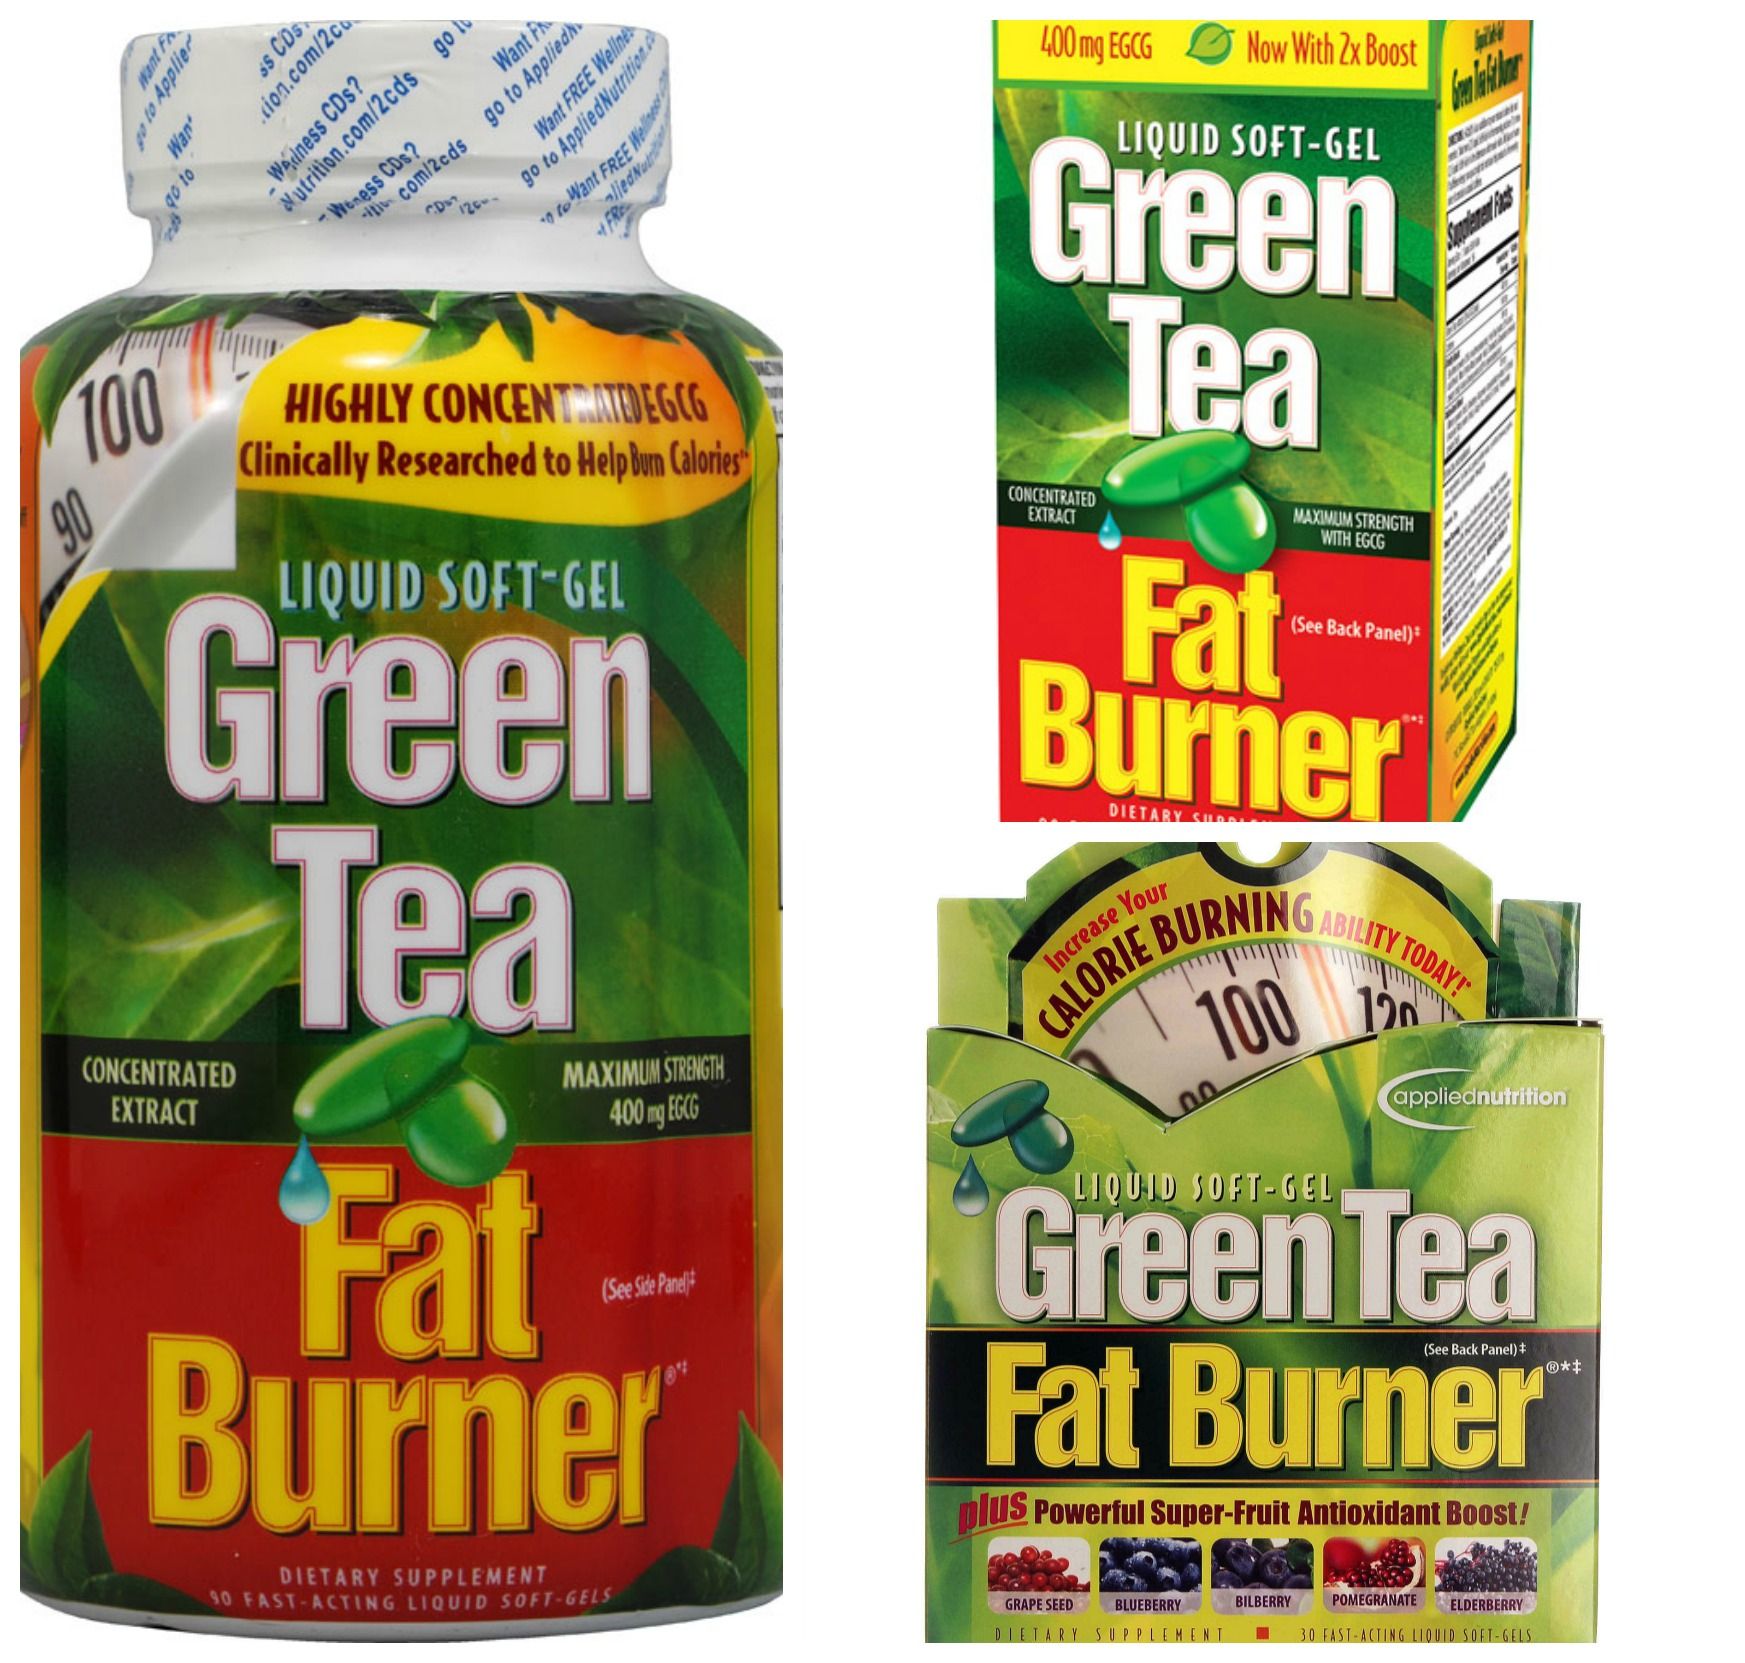 Burn Fat Fast With Green Tea: Discover Its Triple Power For Weight Loss Success